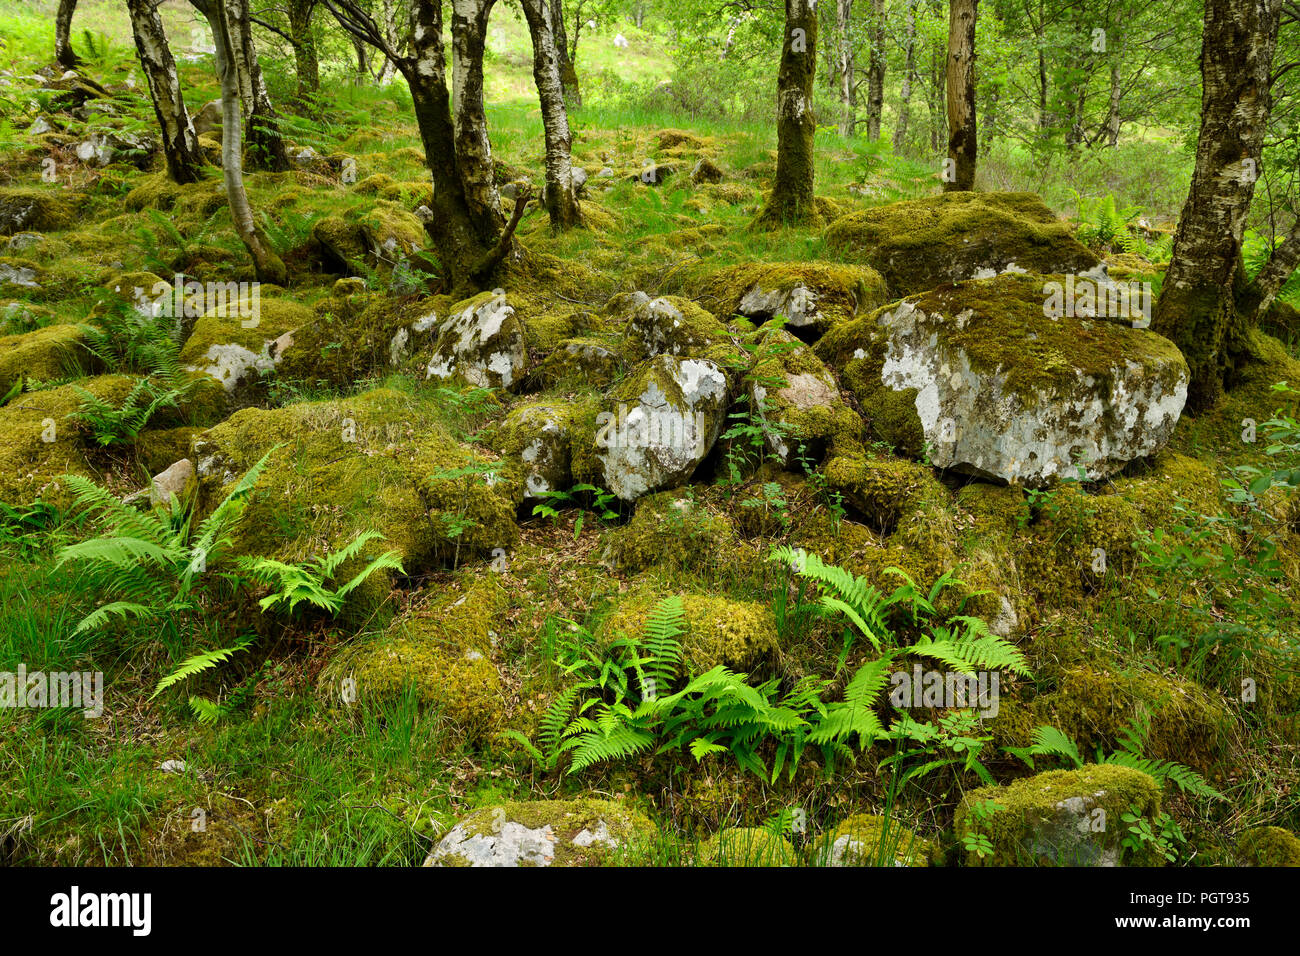 Moss covered rocks in birch tree forest at the foot of Ben Nevis Mountain at Steall Gorge Scottish Highlands Scotland UK Stock Photo